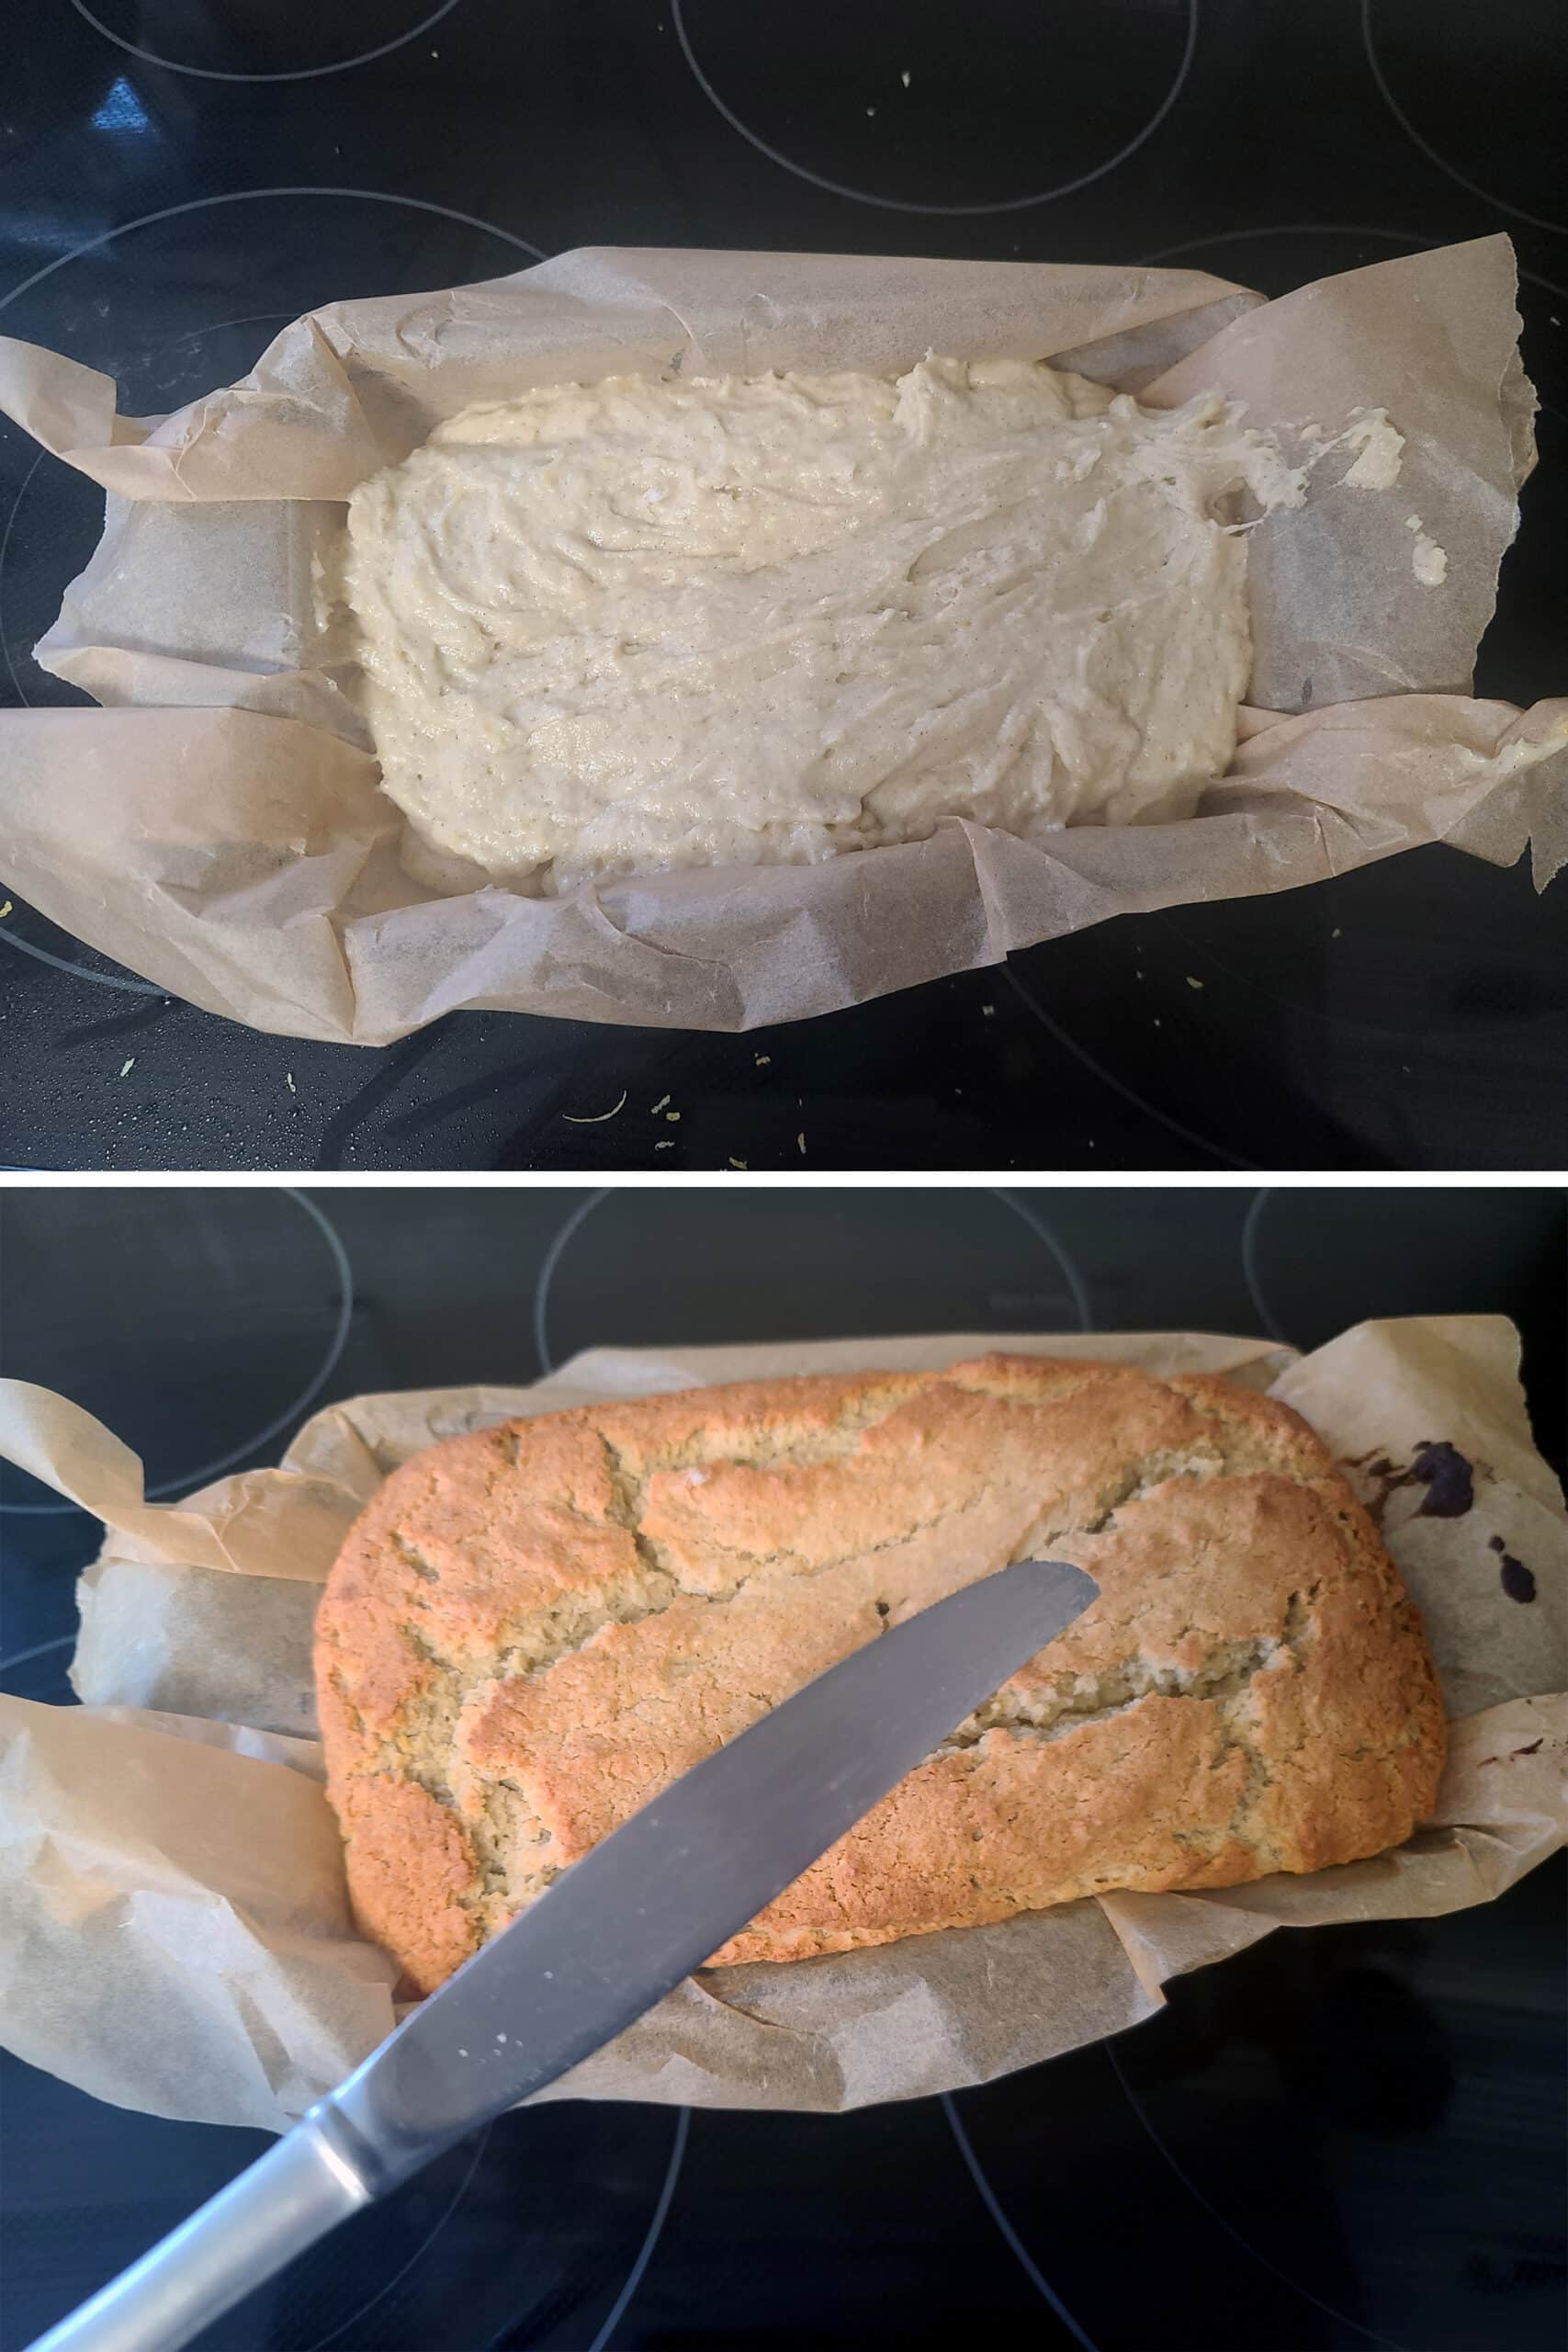 A 2 part image showing the batter in the prepared pan, before and after baking.